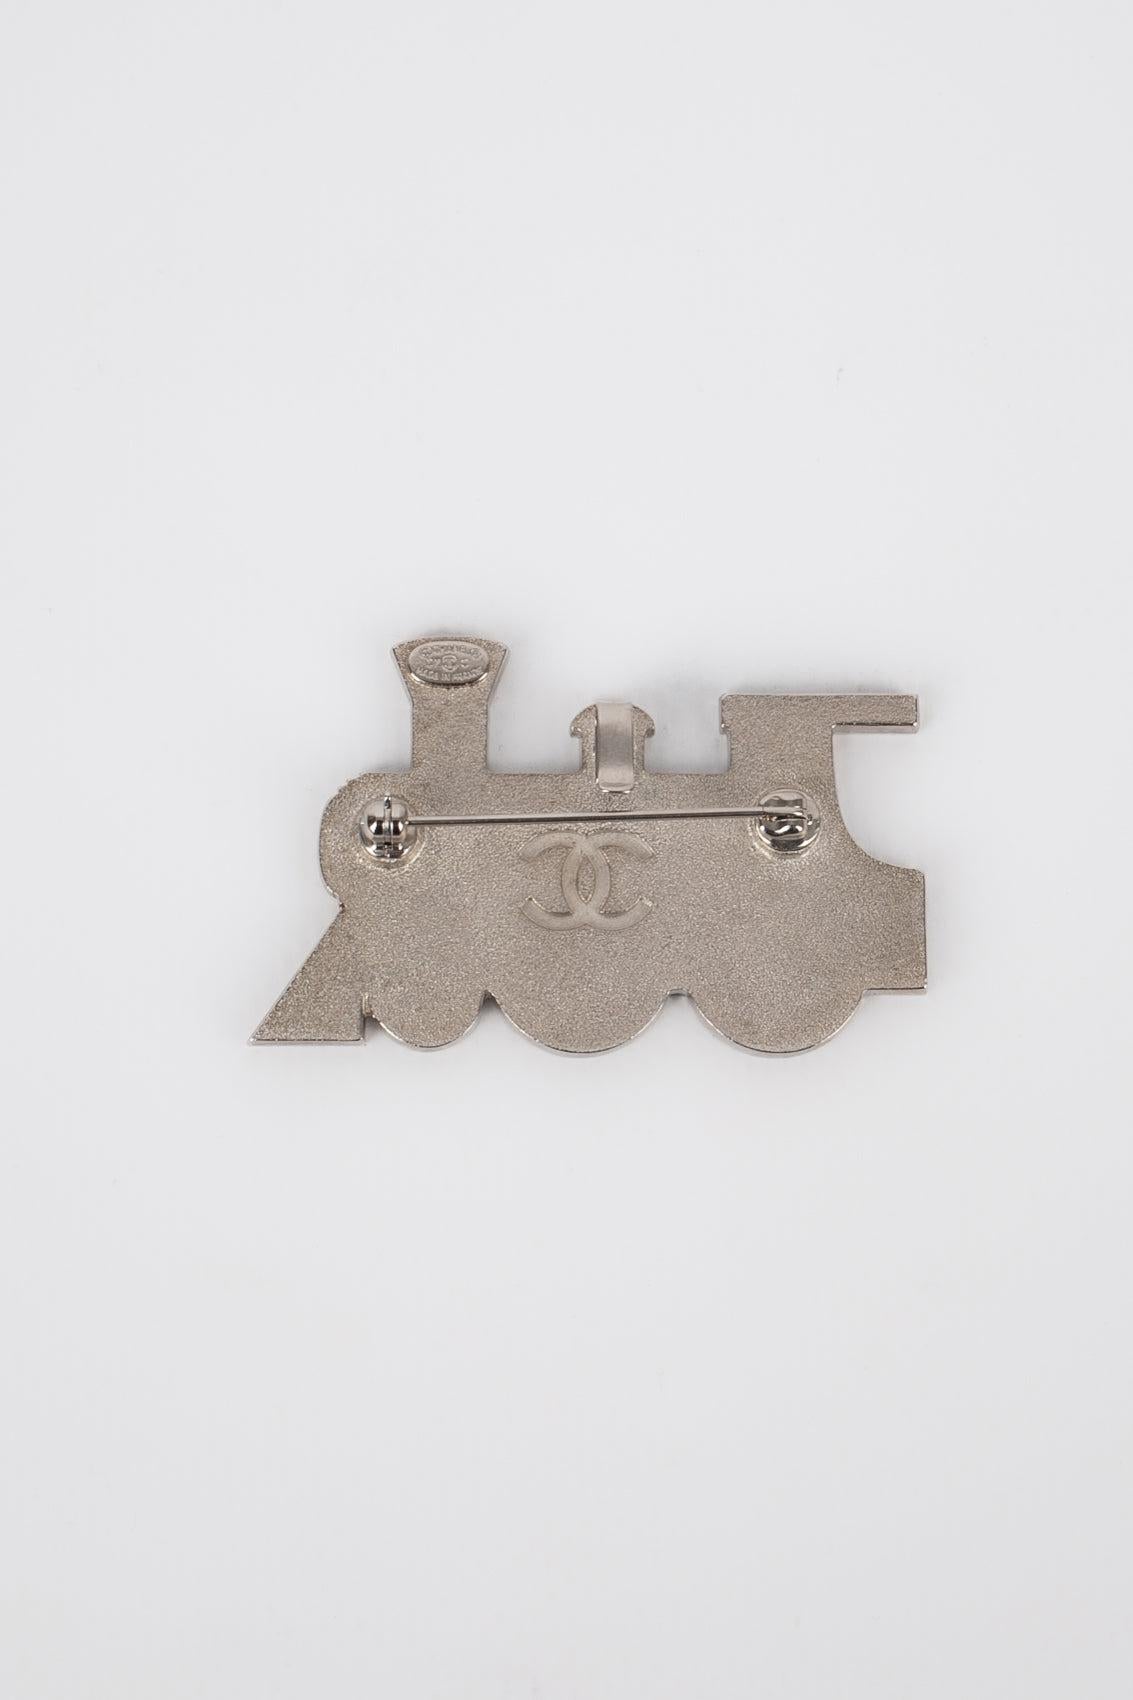 Chanel - (Made in France) Silvery metal brooch with enamel representing a locomotive. 2007 Cruise Collection.
 
 Additional information: 
 Condition: Very good condition
 Dimensions: 5.5 cm x 3.5 cm
 Period: 21st Century
 
 Seller Reference: BRB146